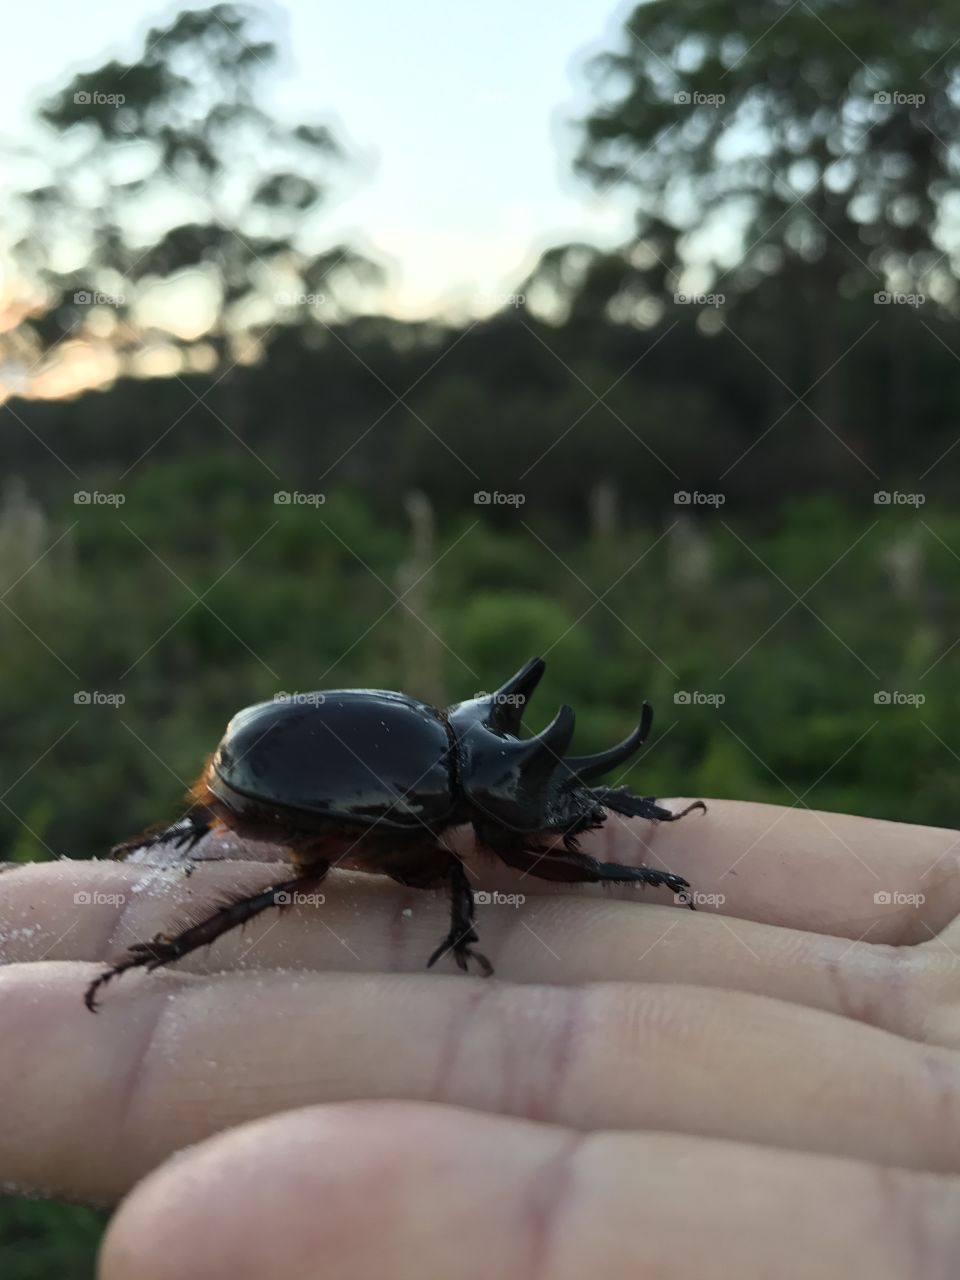 Found a Dung beetle 